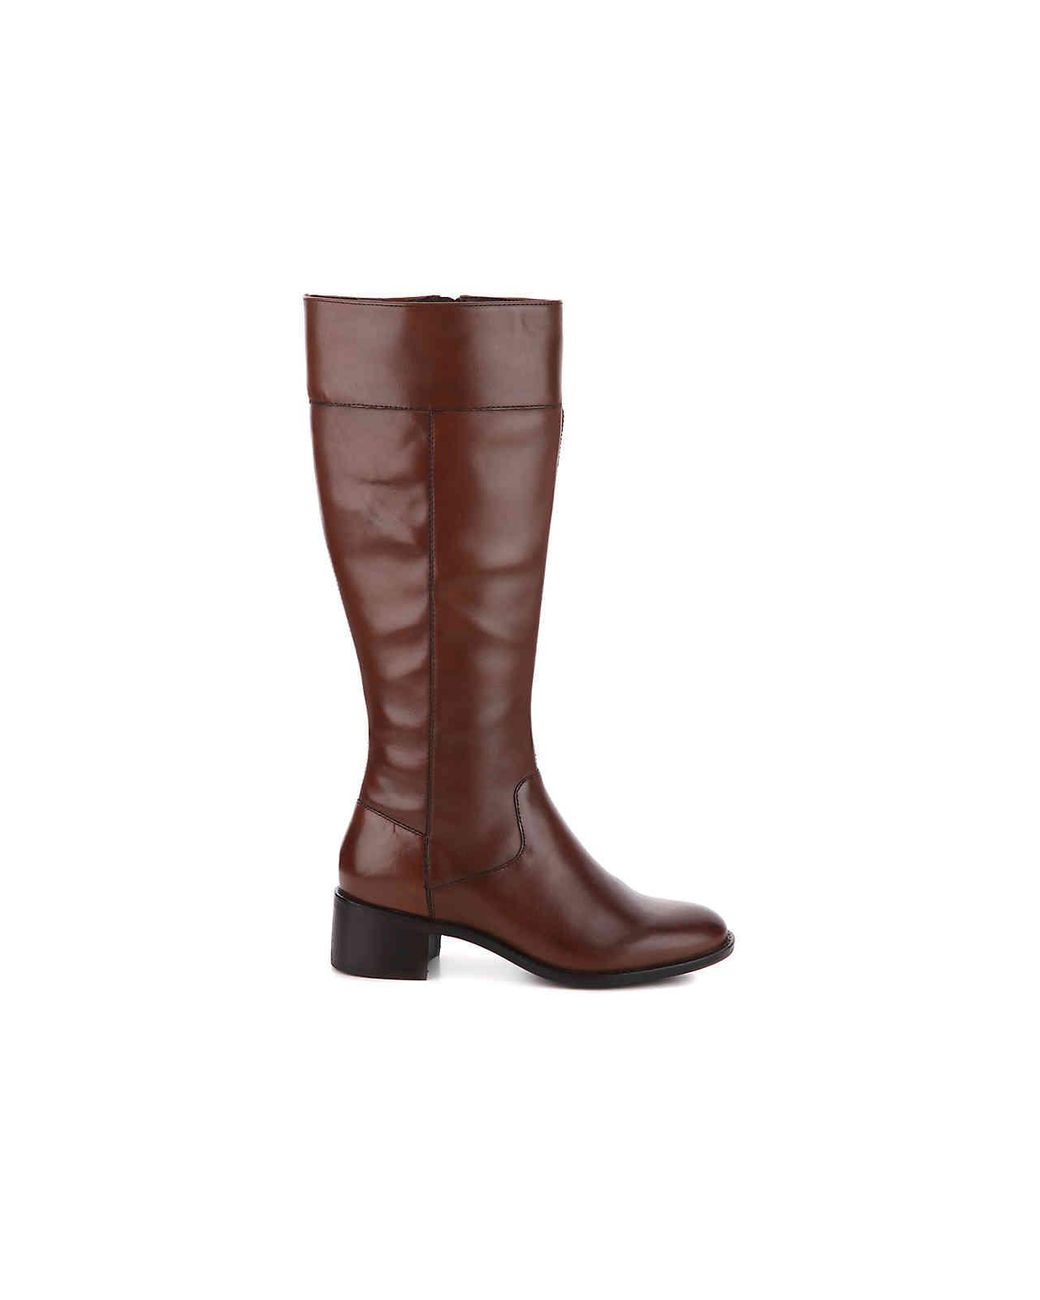 Cole Haan Leather Cora Riding Boot in 